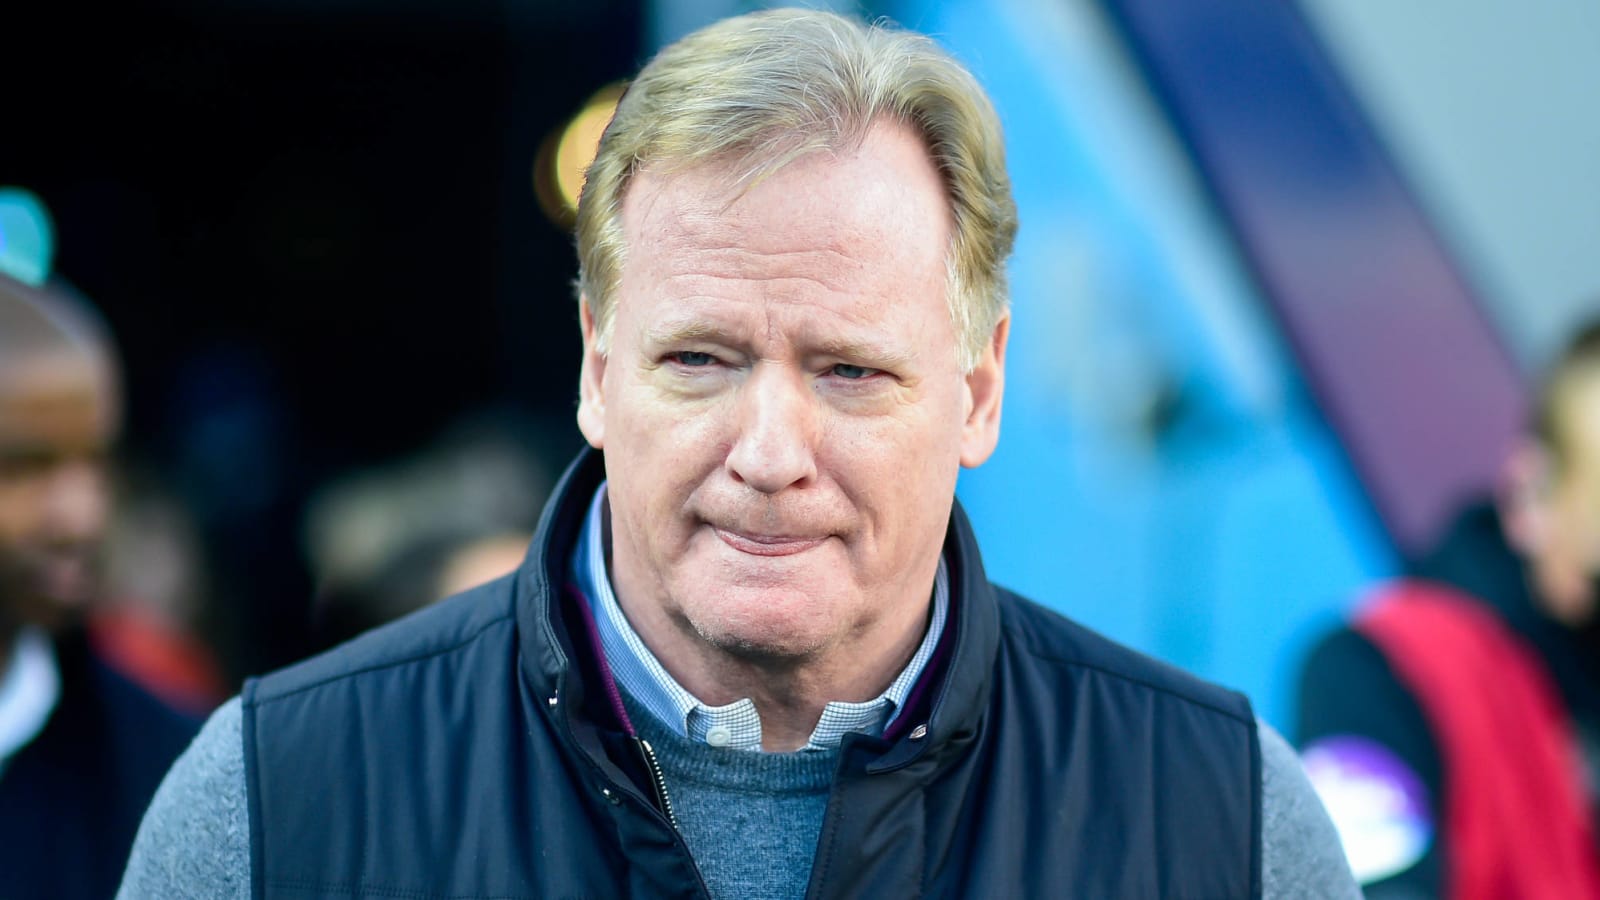 Roger Goodell: Tanking claims 'will be reviewed thoroughly'